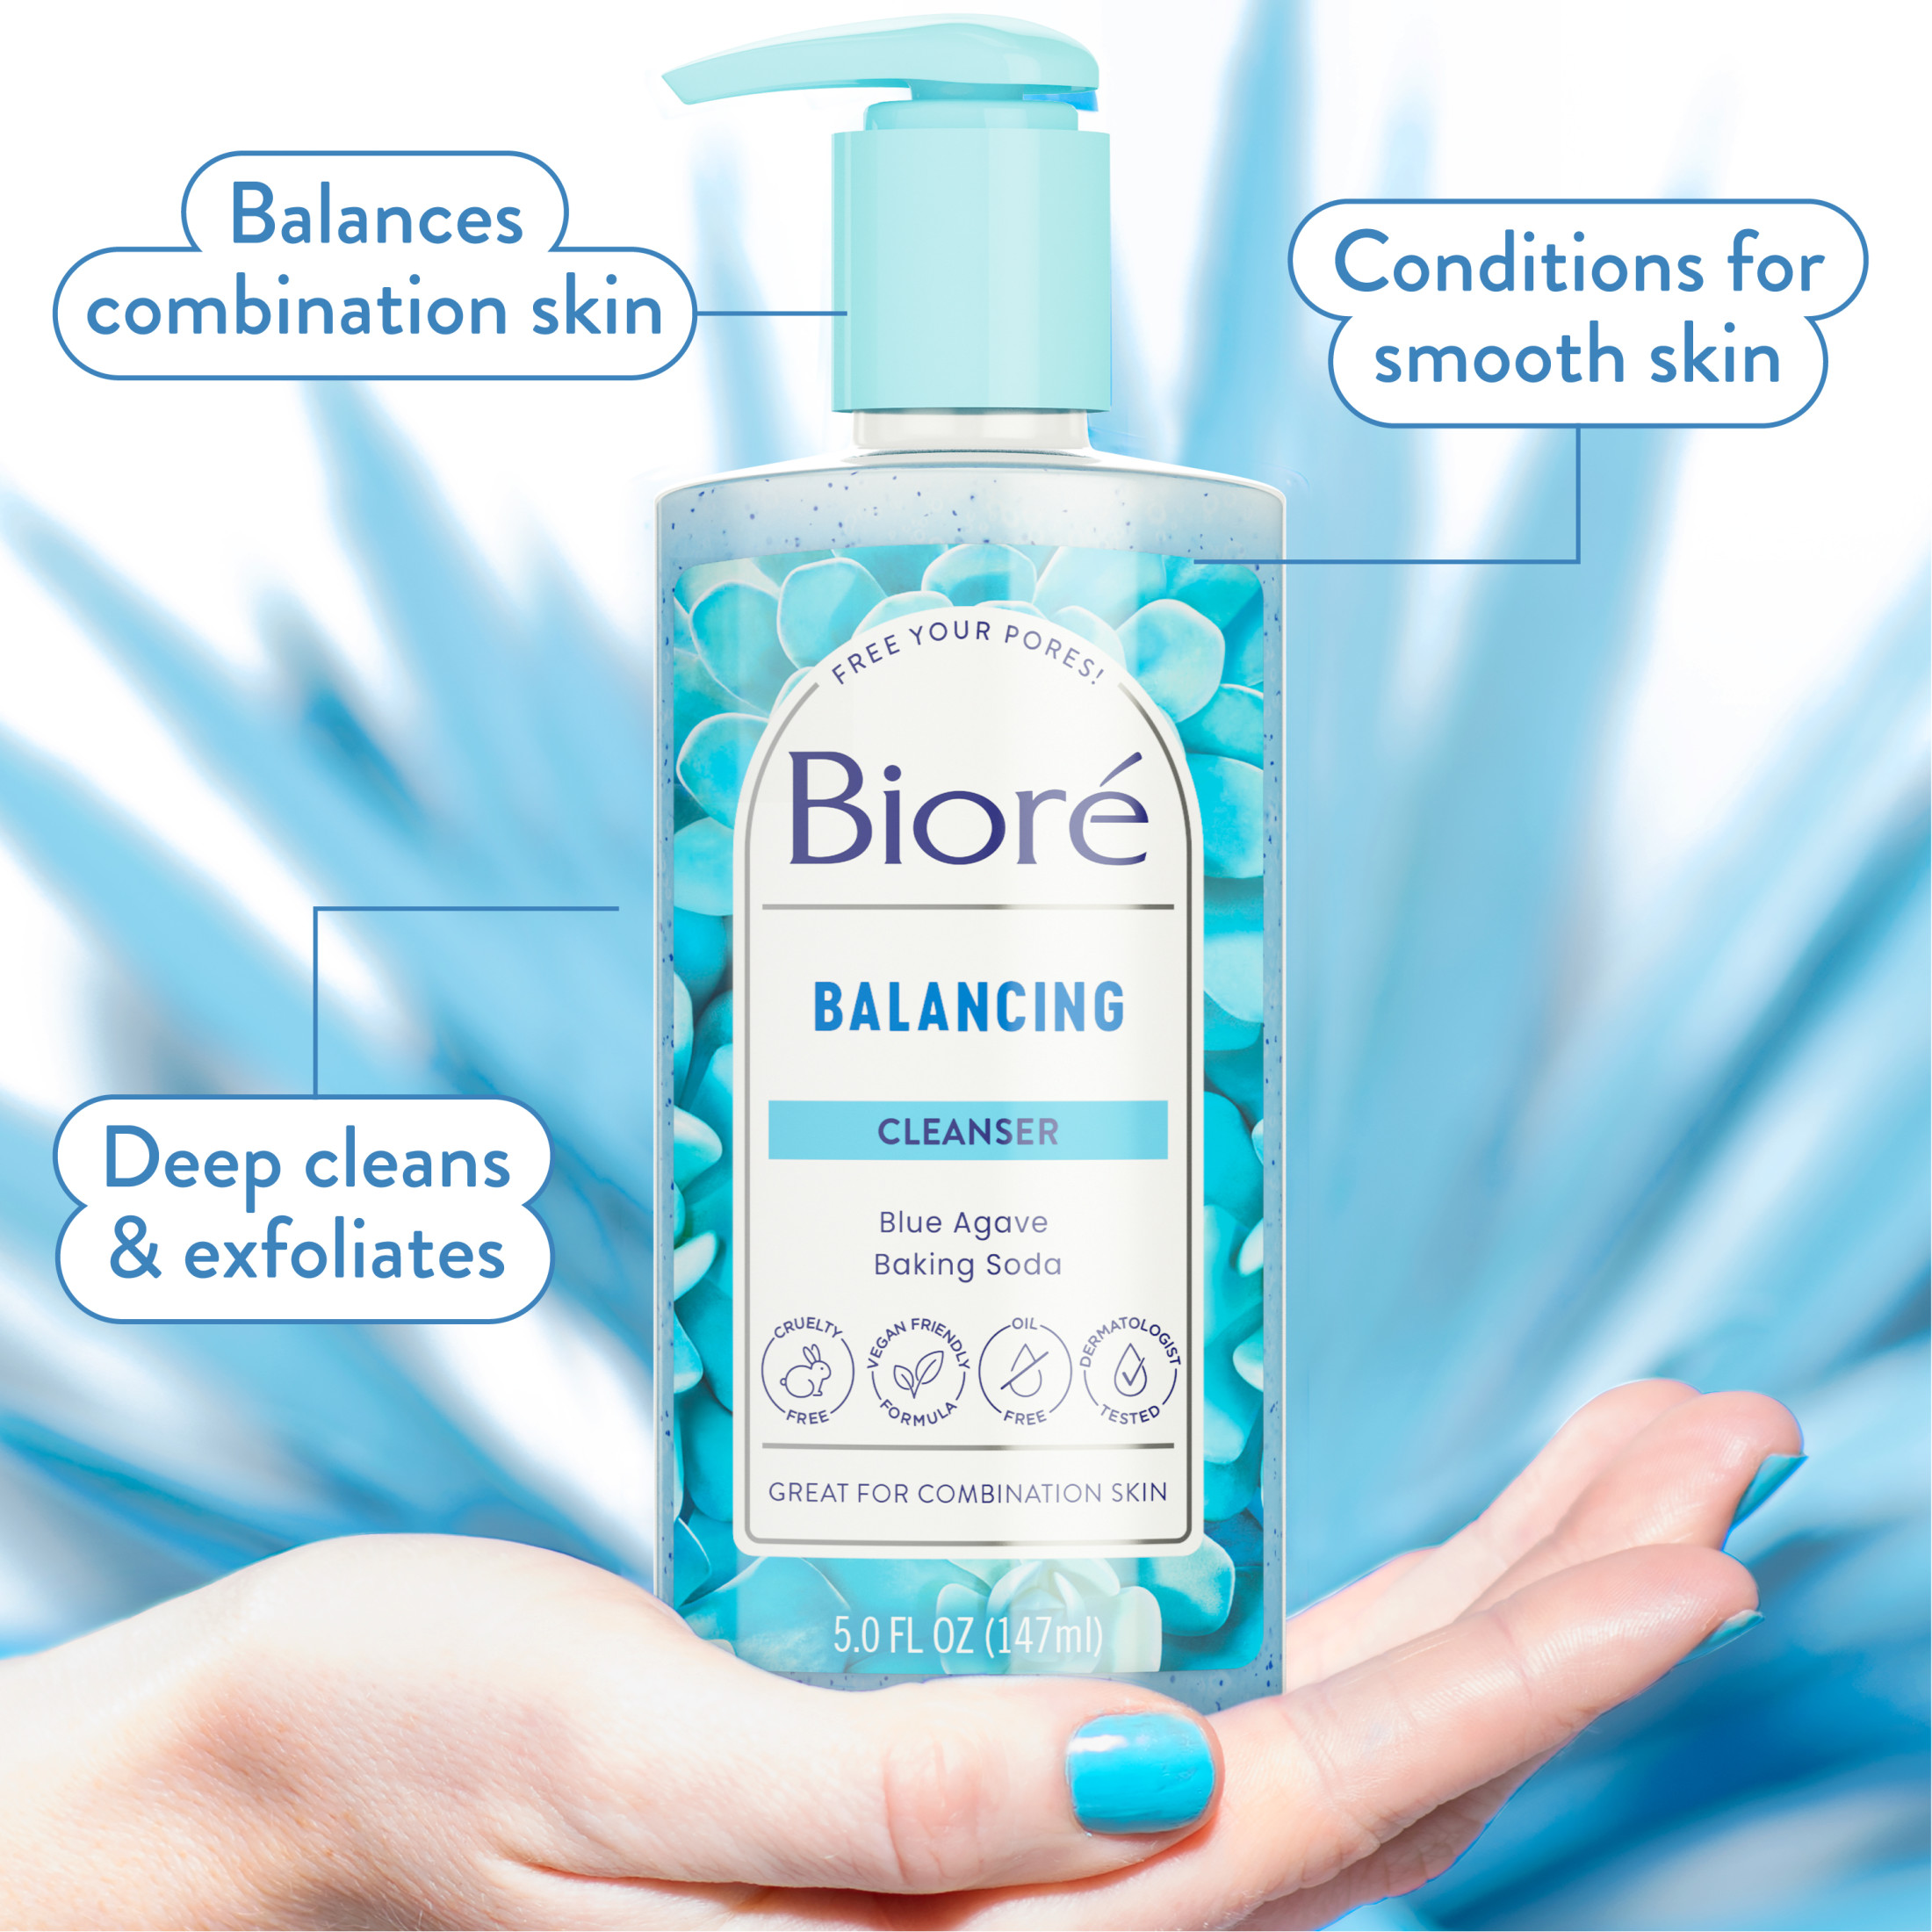 Biore Balancing Face Wash, PH Balanced Face Cleanser, Combination Skin, Cruelty Free 6.77 Oz - image 4 of 11